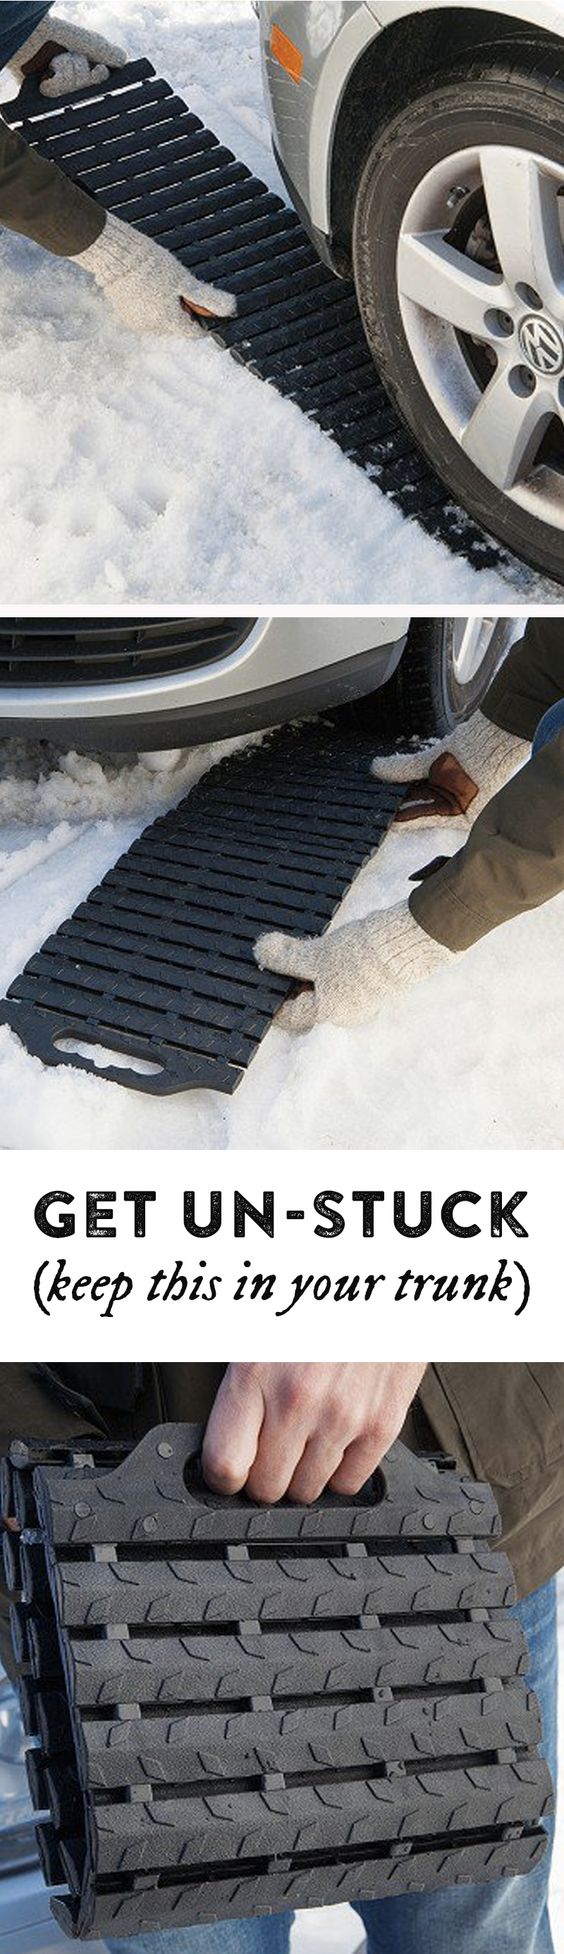 Stuck in ice, mud, or sand? This mat’s flexible, treaded links grip the ground to give wheels traction. Folds up to store in your trunk.